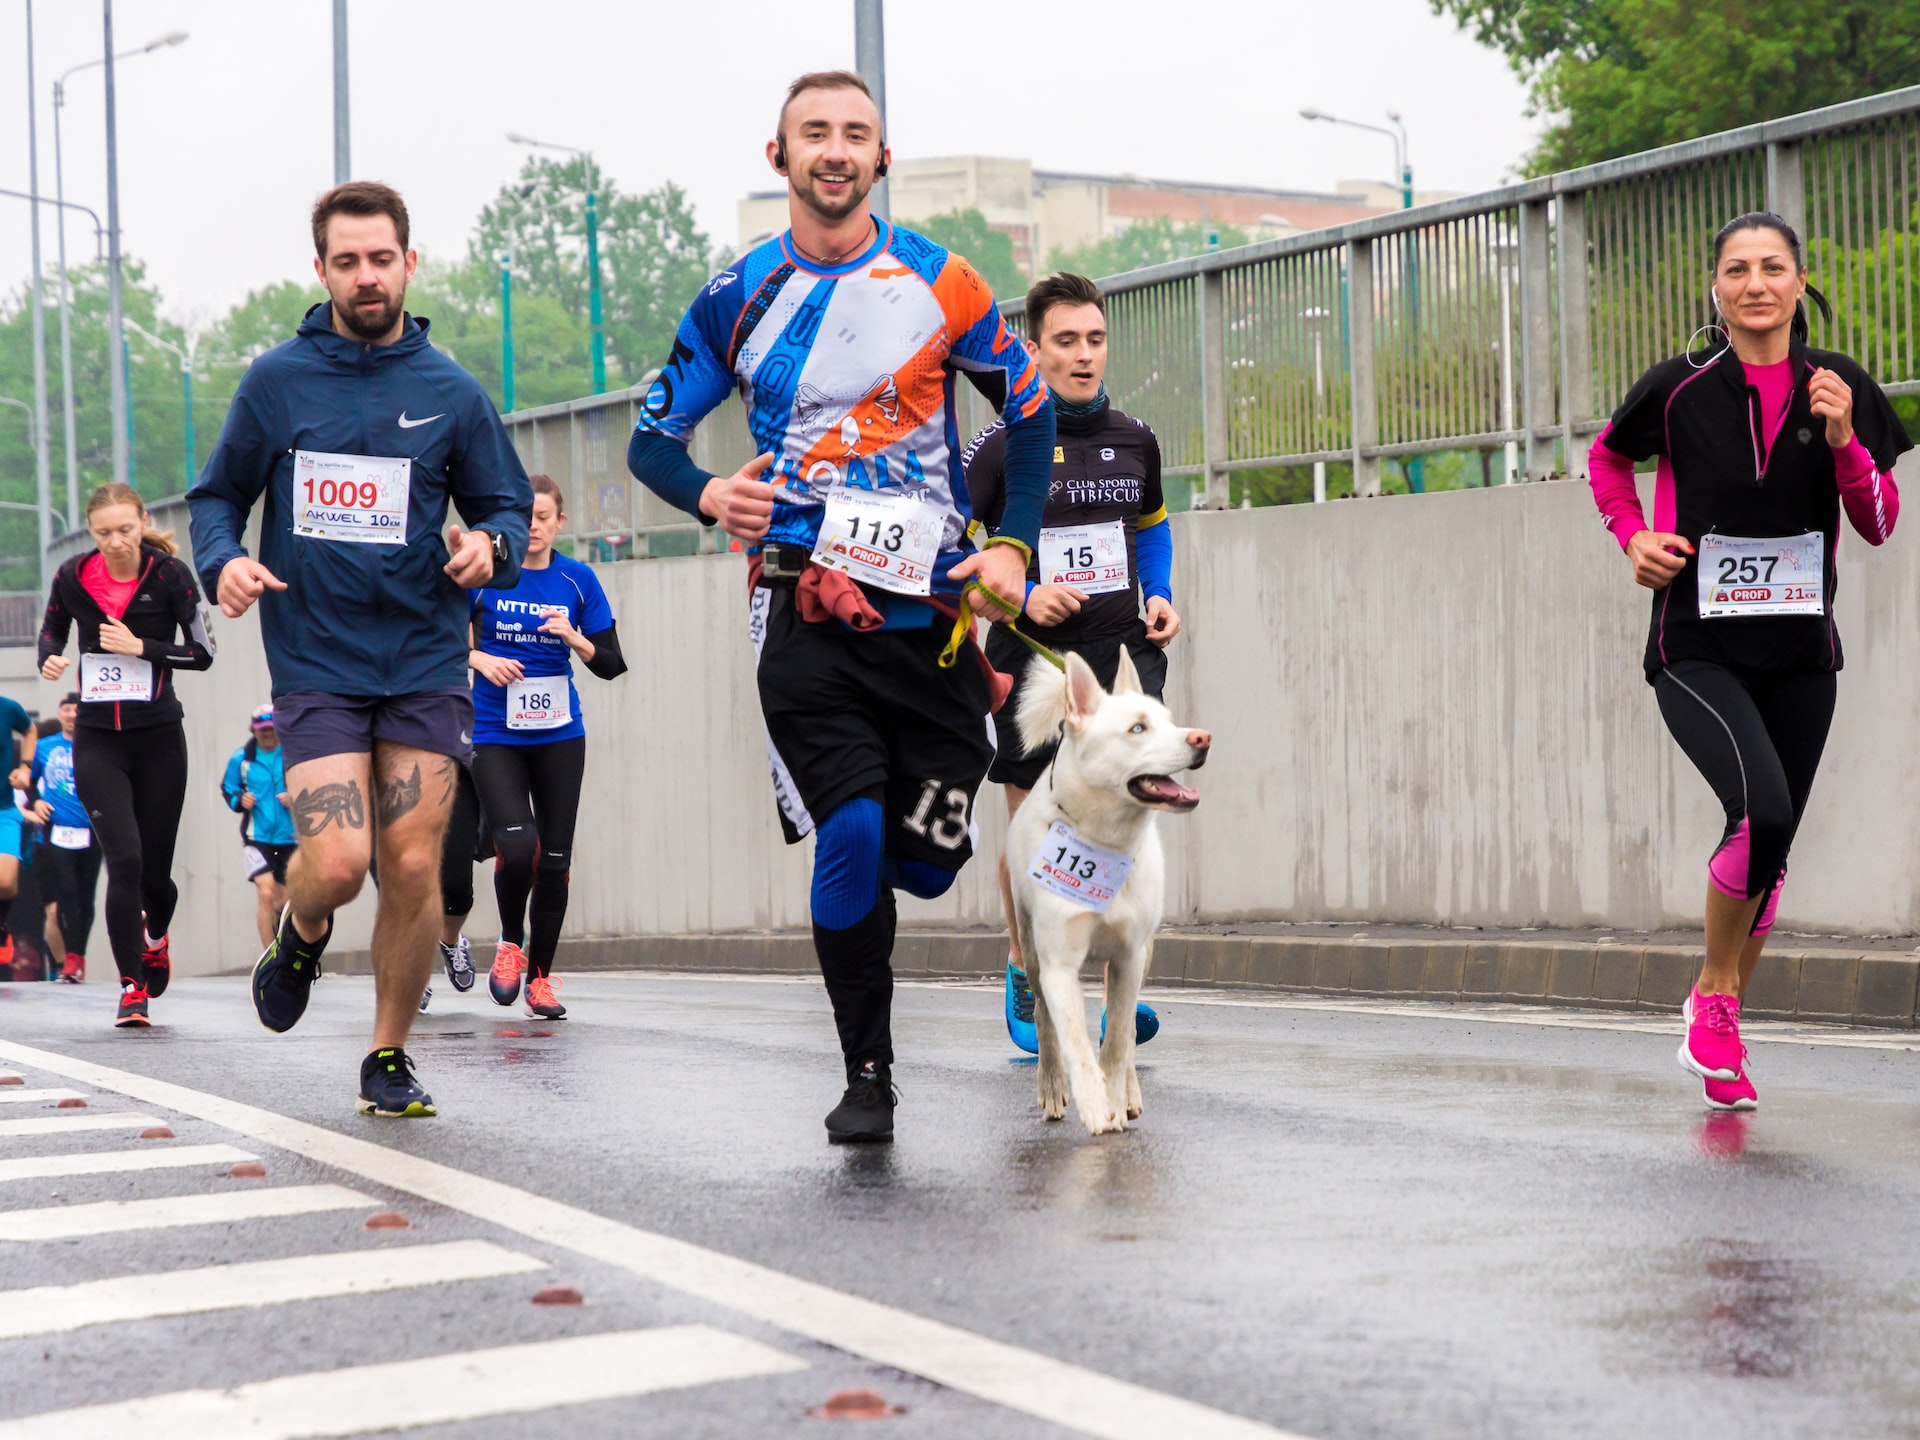 People running in a marathon on the road with a dog